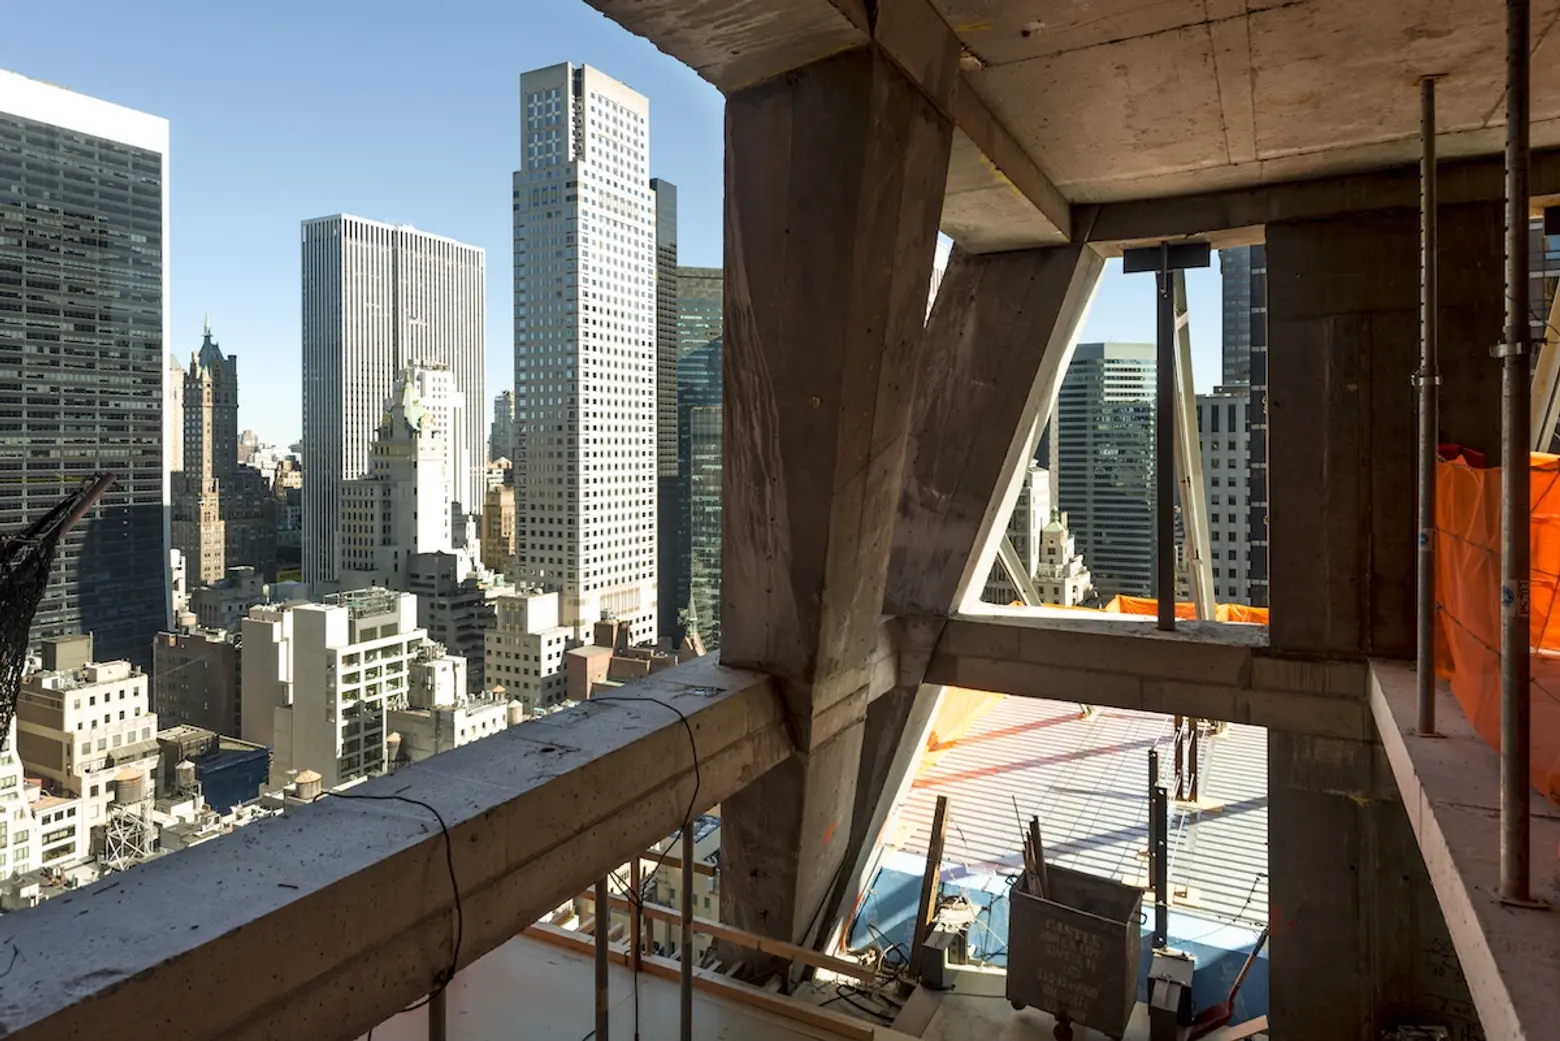 53W53, 53 West 53rd Street, MoMA Tower, Jean Nouvel, Thierry Despont, new developments, midtown west